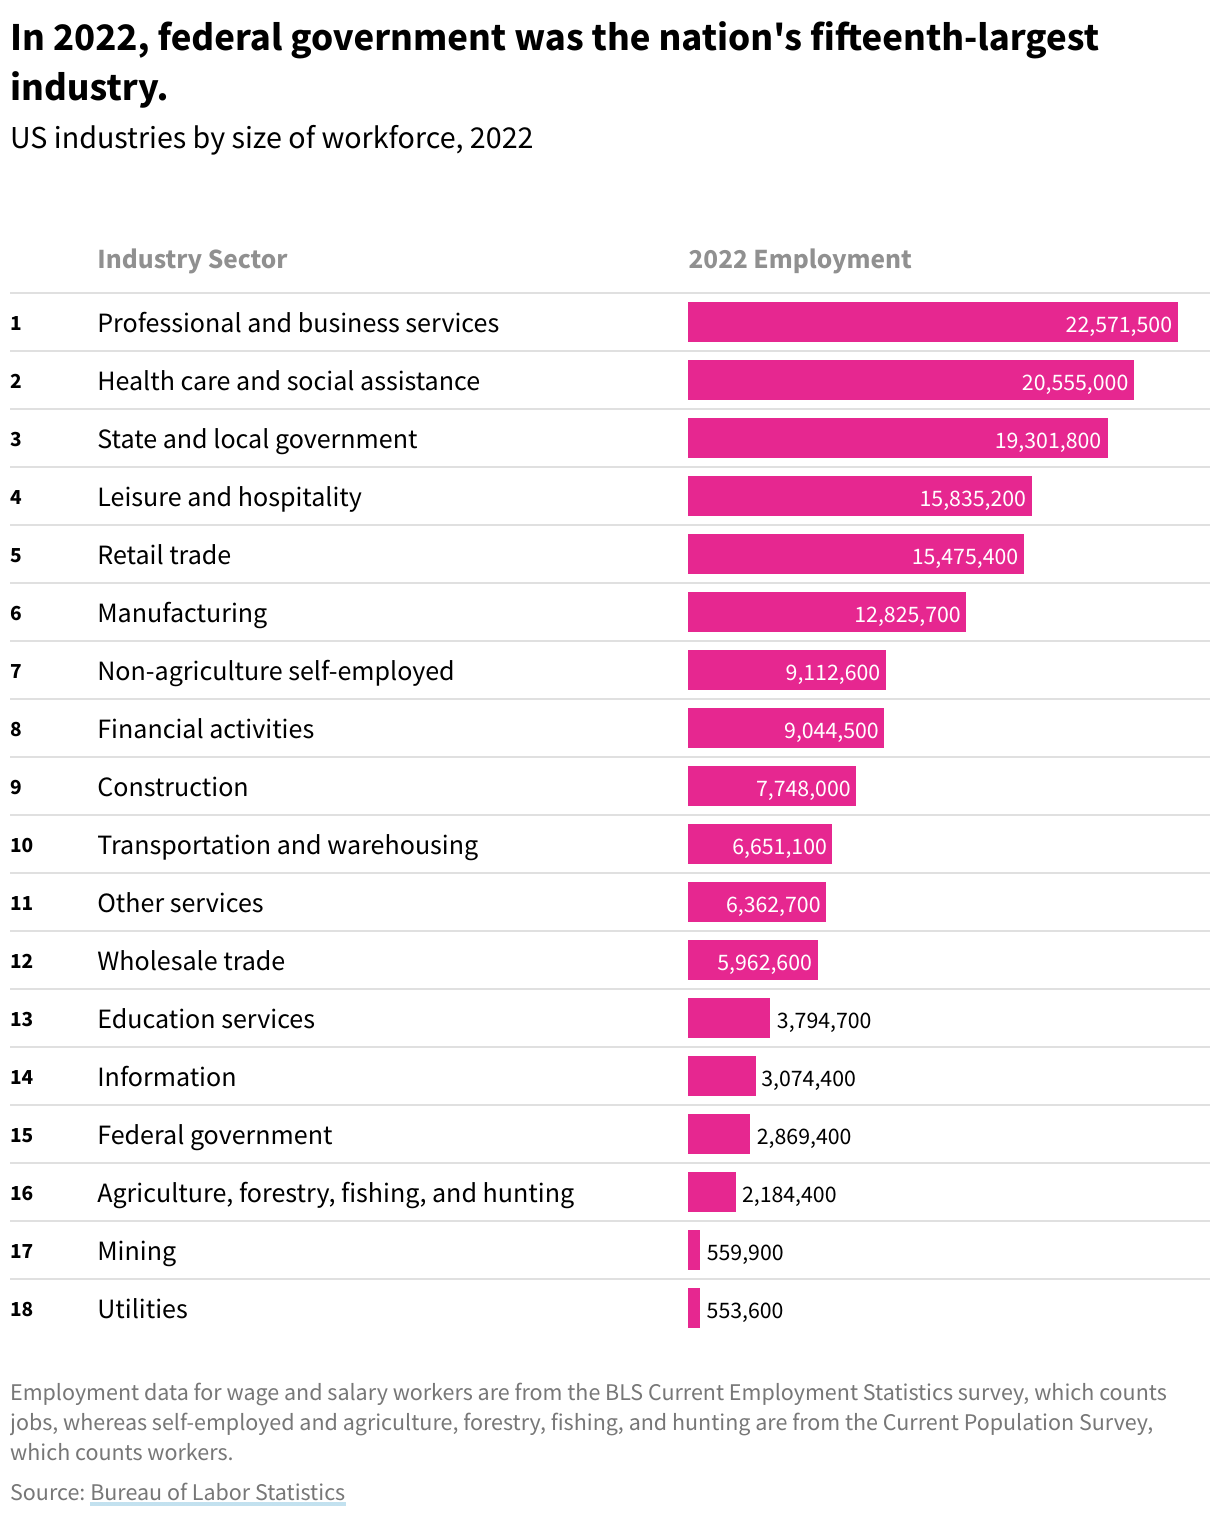 Table showing US industries by size of workforce in 2022. Professional and business services	 is the largest.